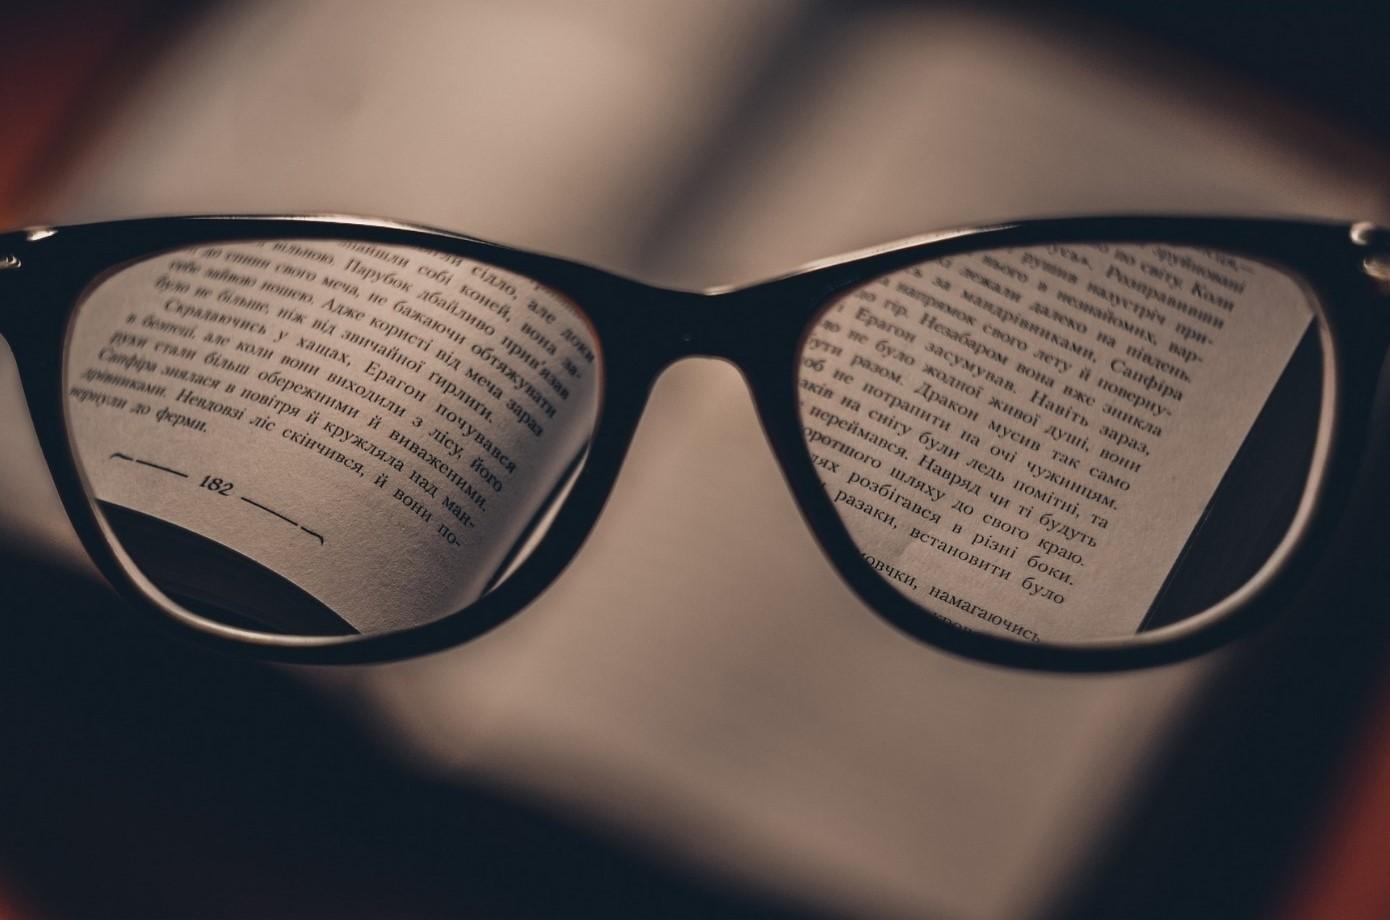 A pair of glasses magnifying the words on a book.